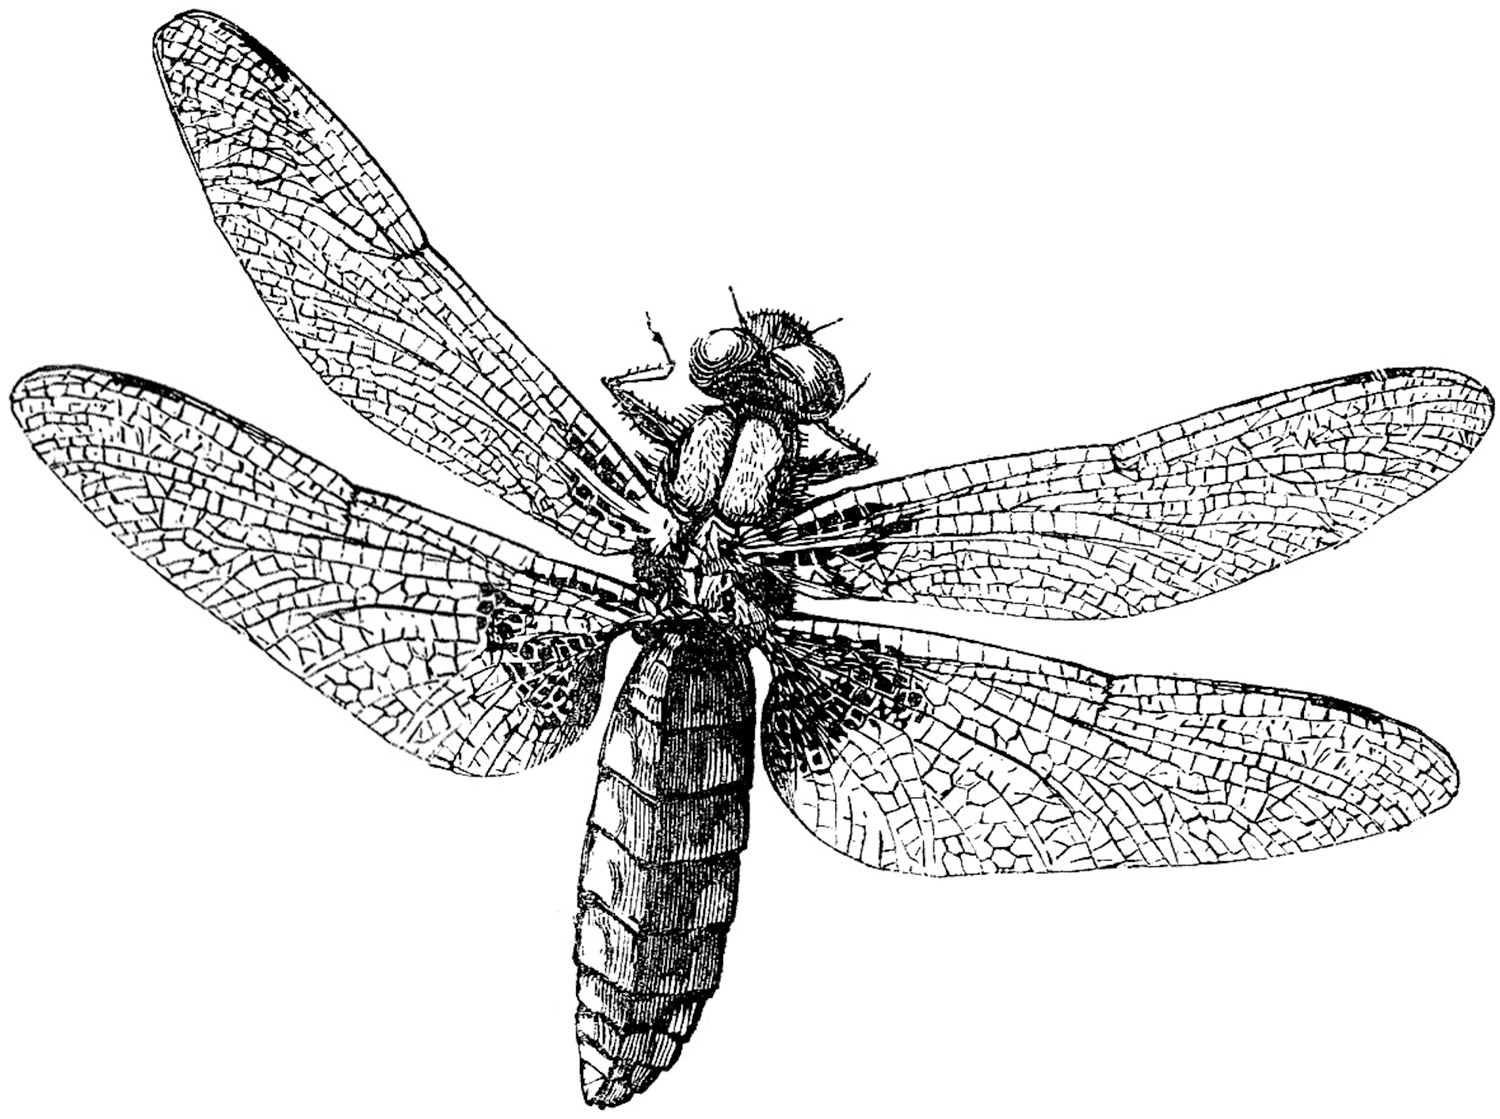 Royalty Free Images - Dragonfly - The Graphics Fairy